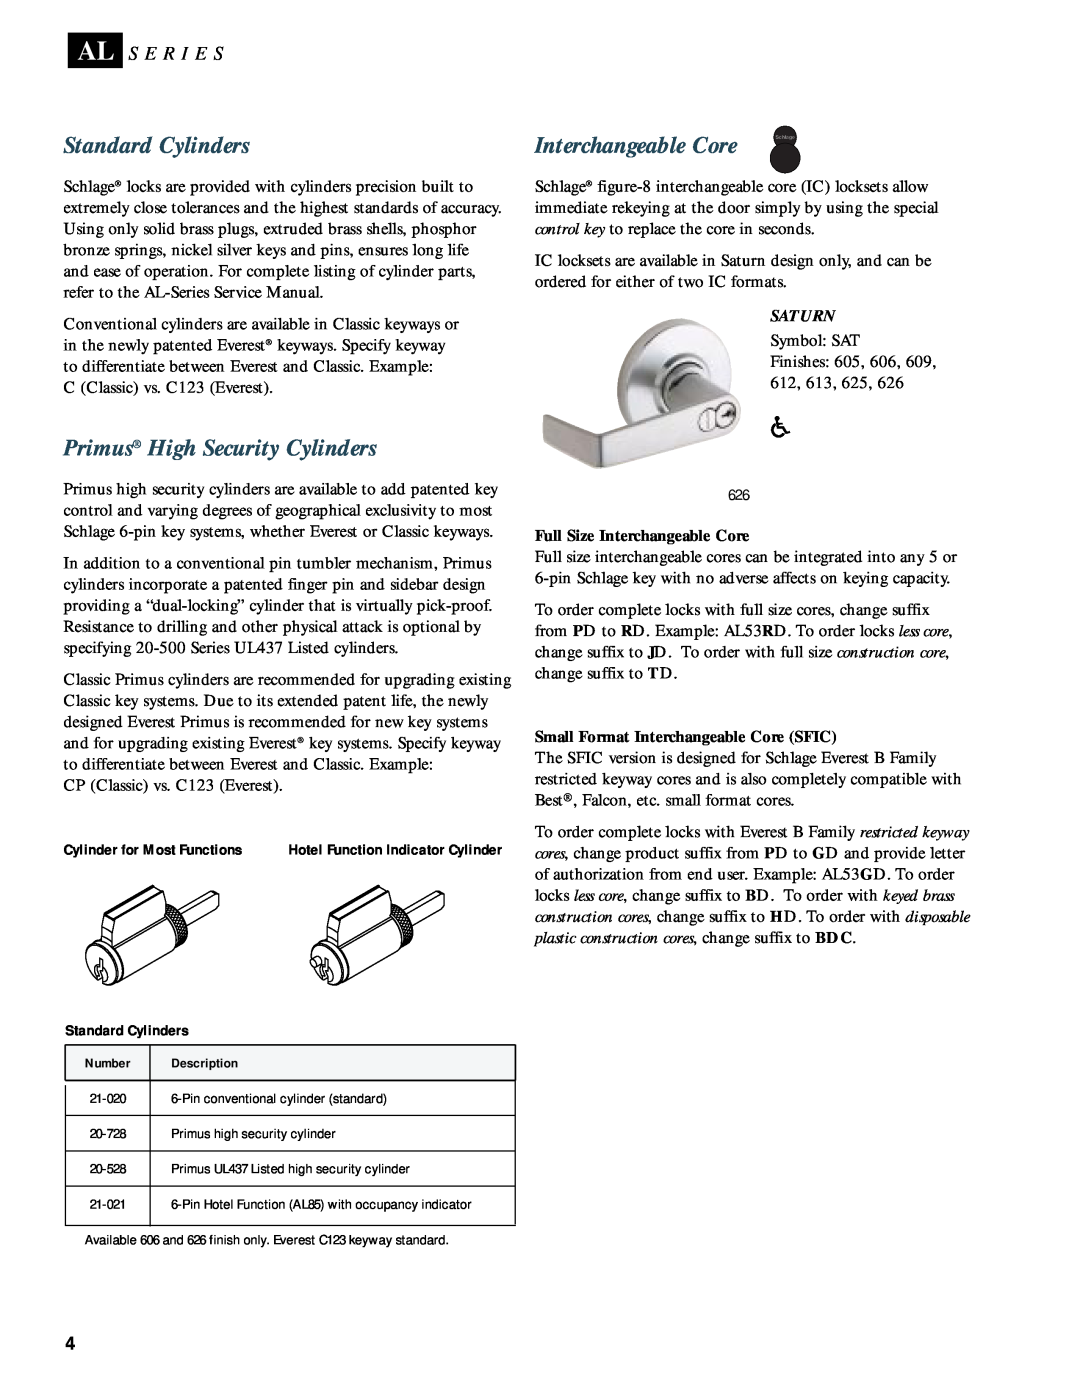 Schlage AL-SERIES manual Standard Cylinders, Interchangeable Core, Primus High Security Cylinders, Al S E R I E S, Saturn 